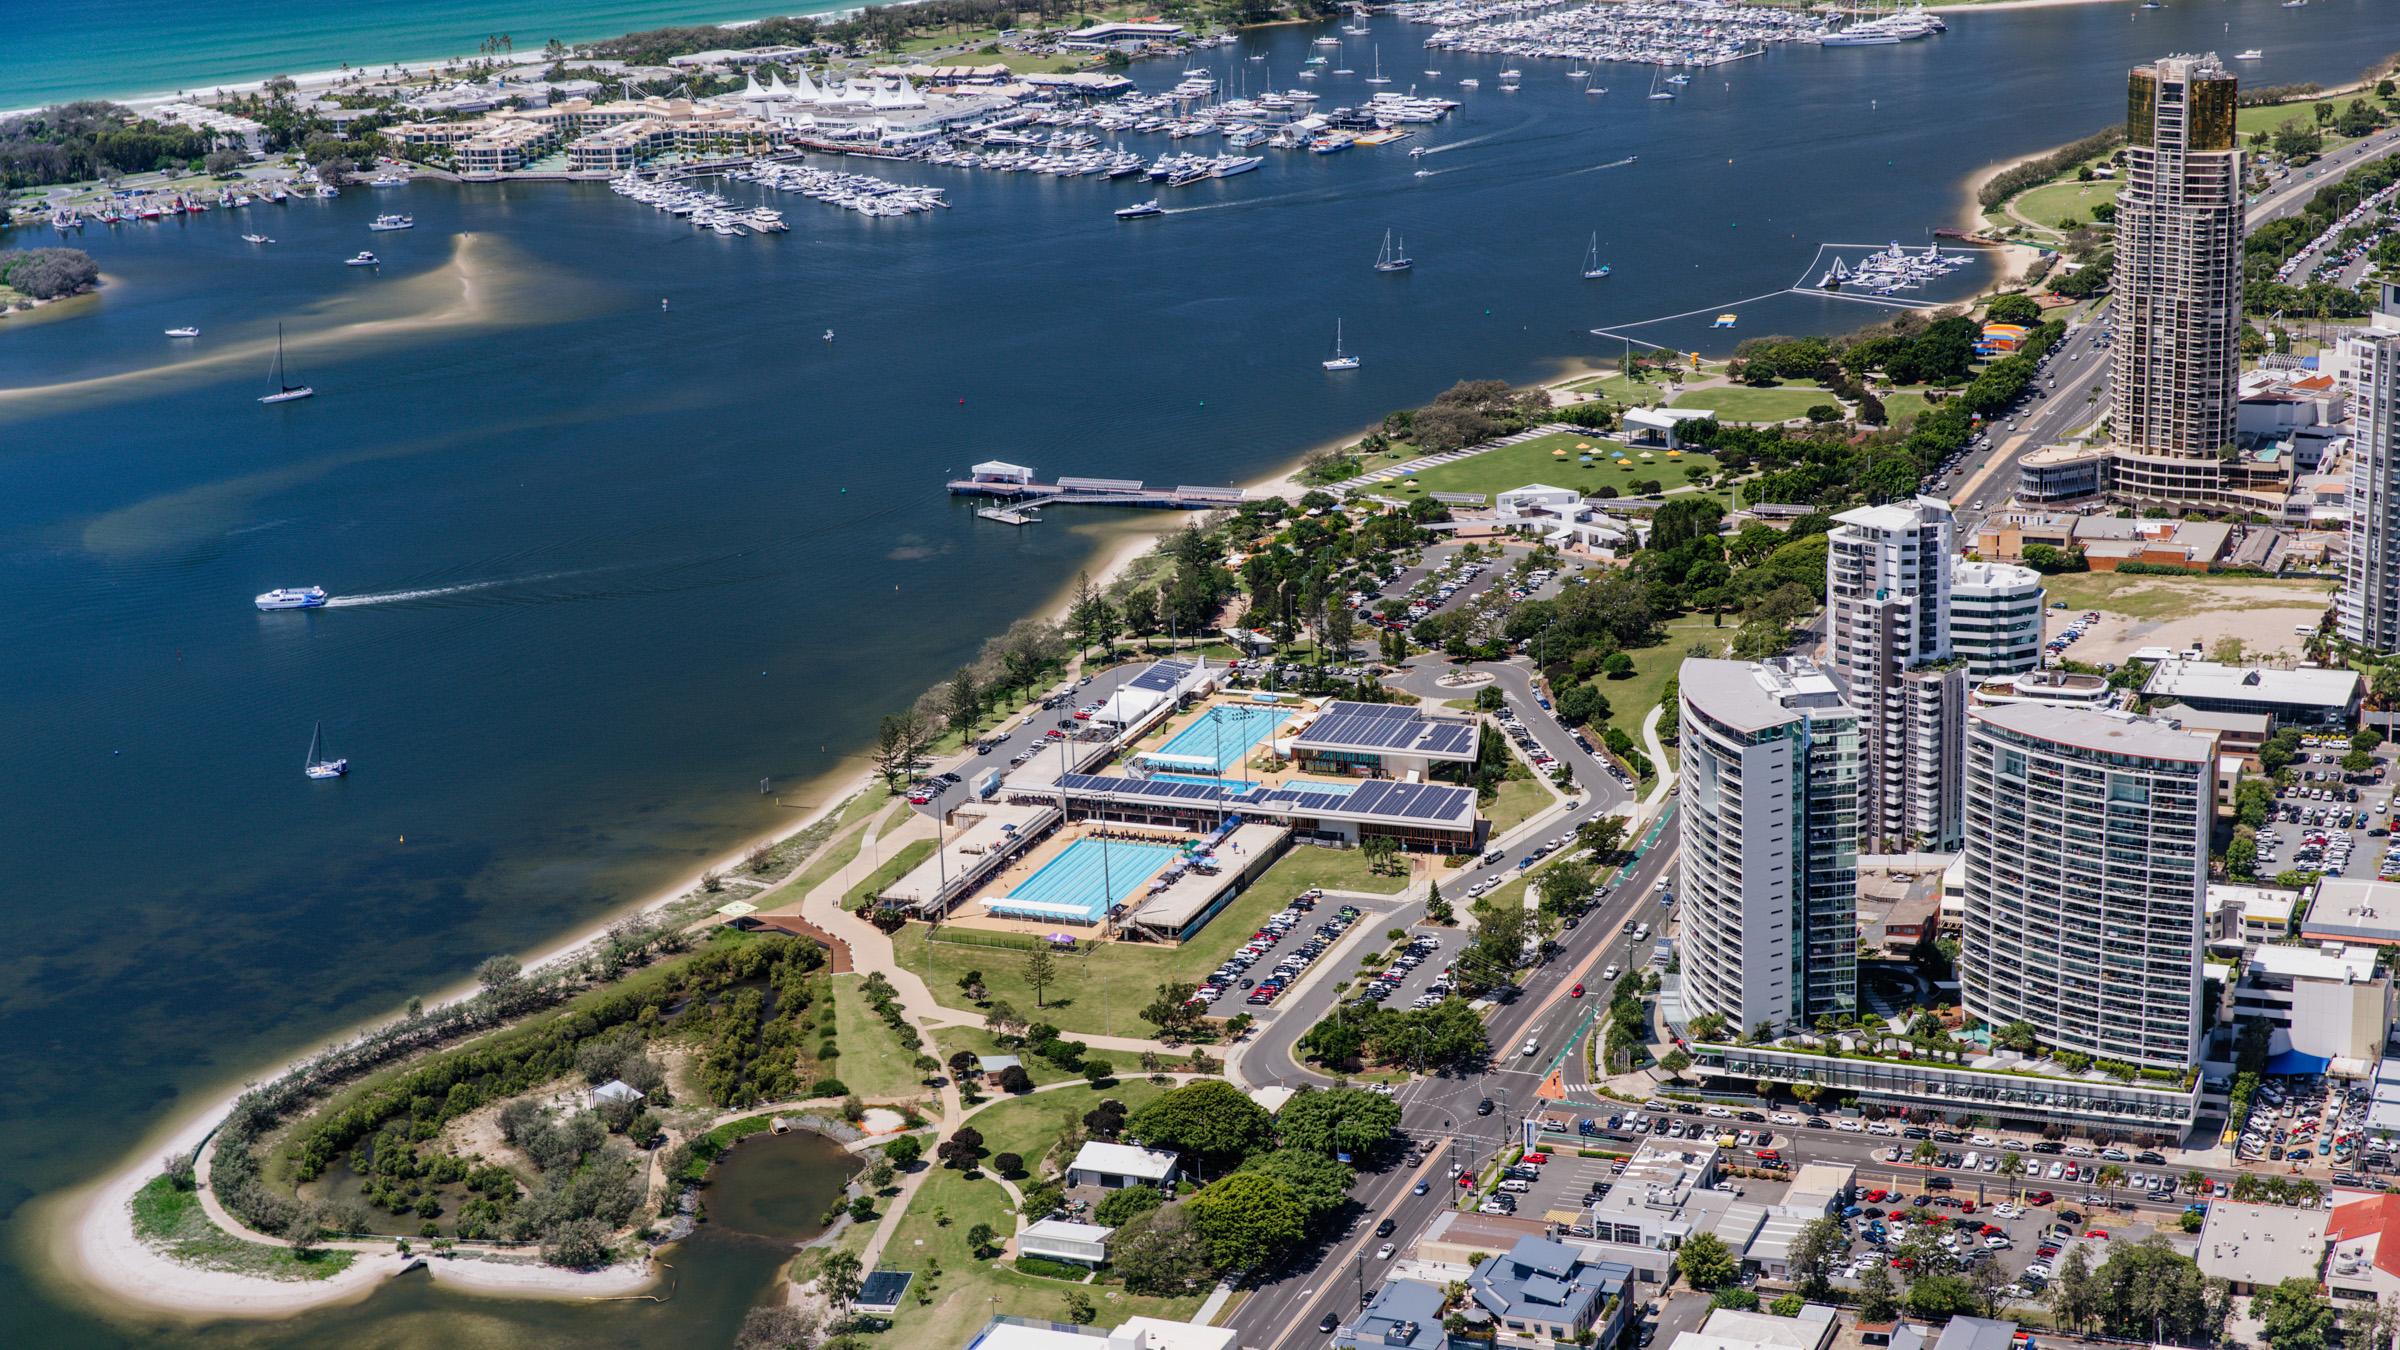 Aerial view of Broadwater Parklands pools and facilities